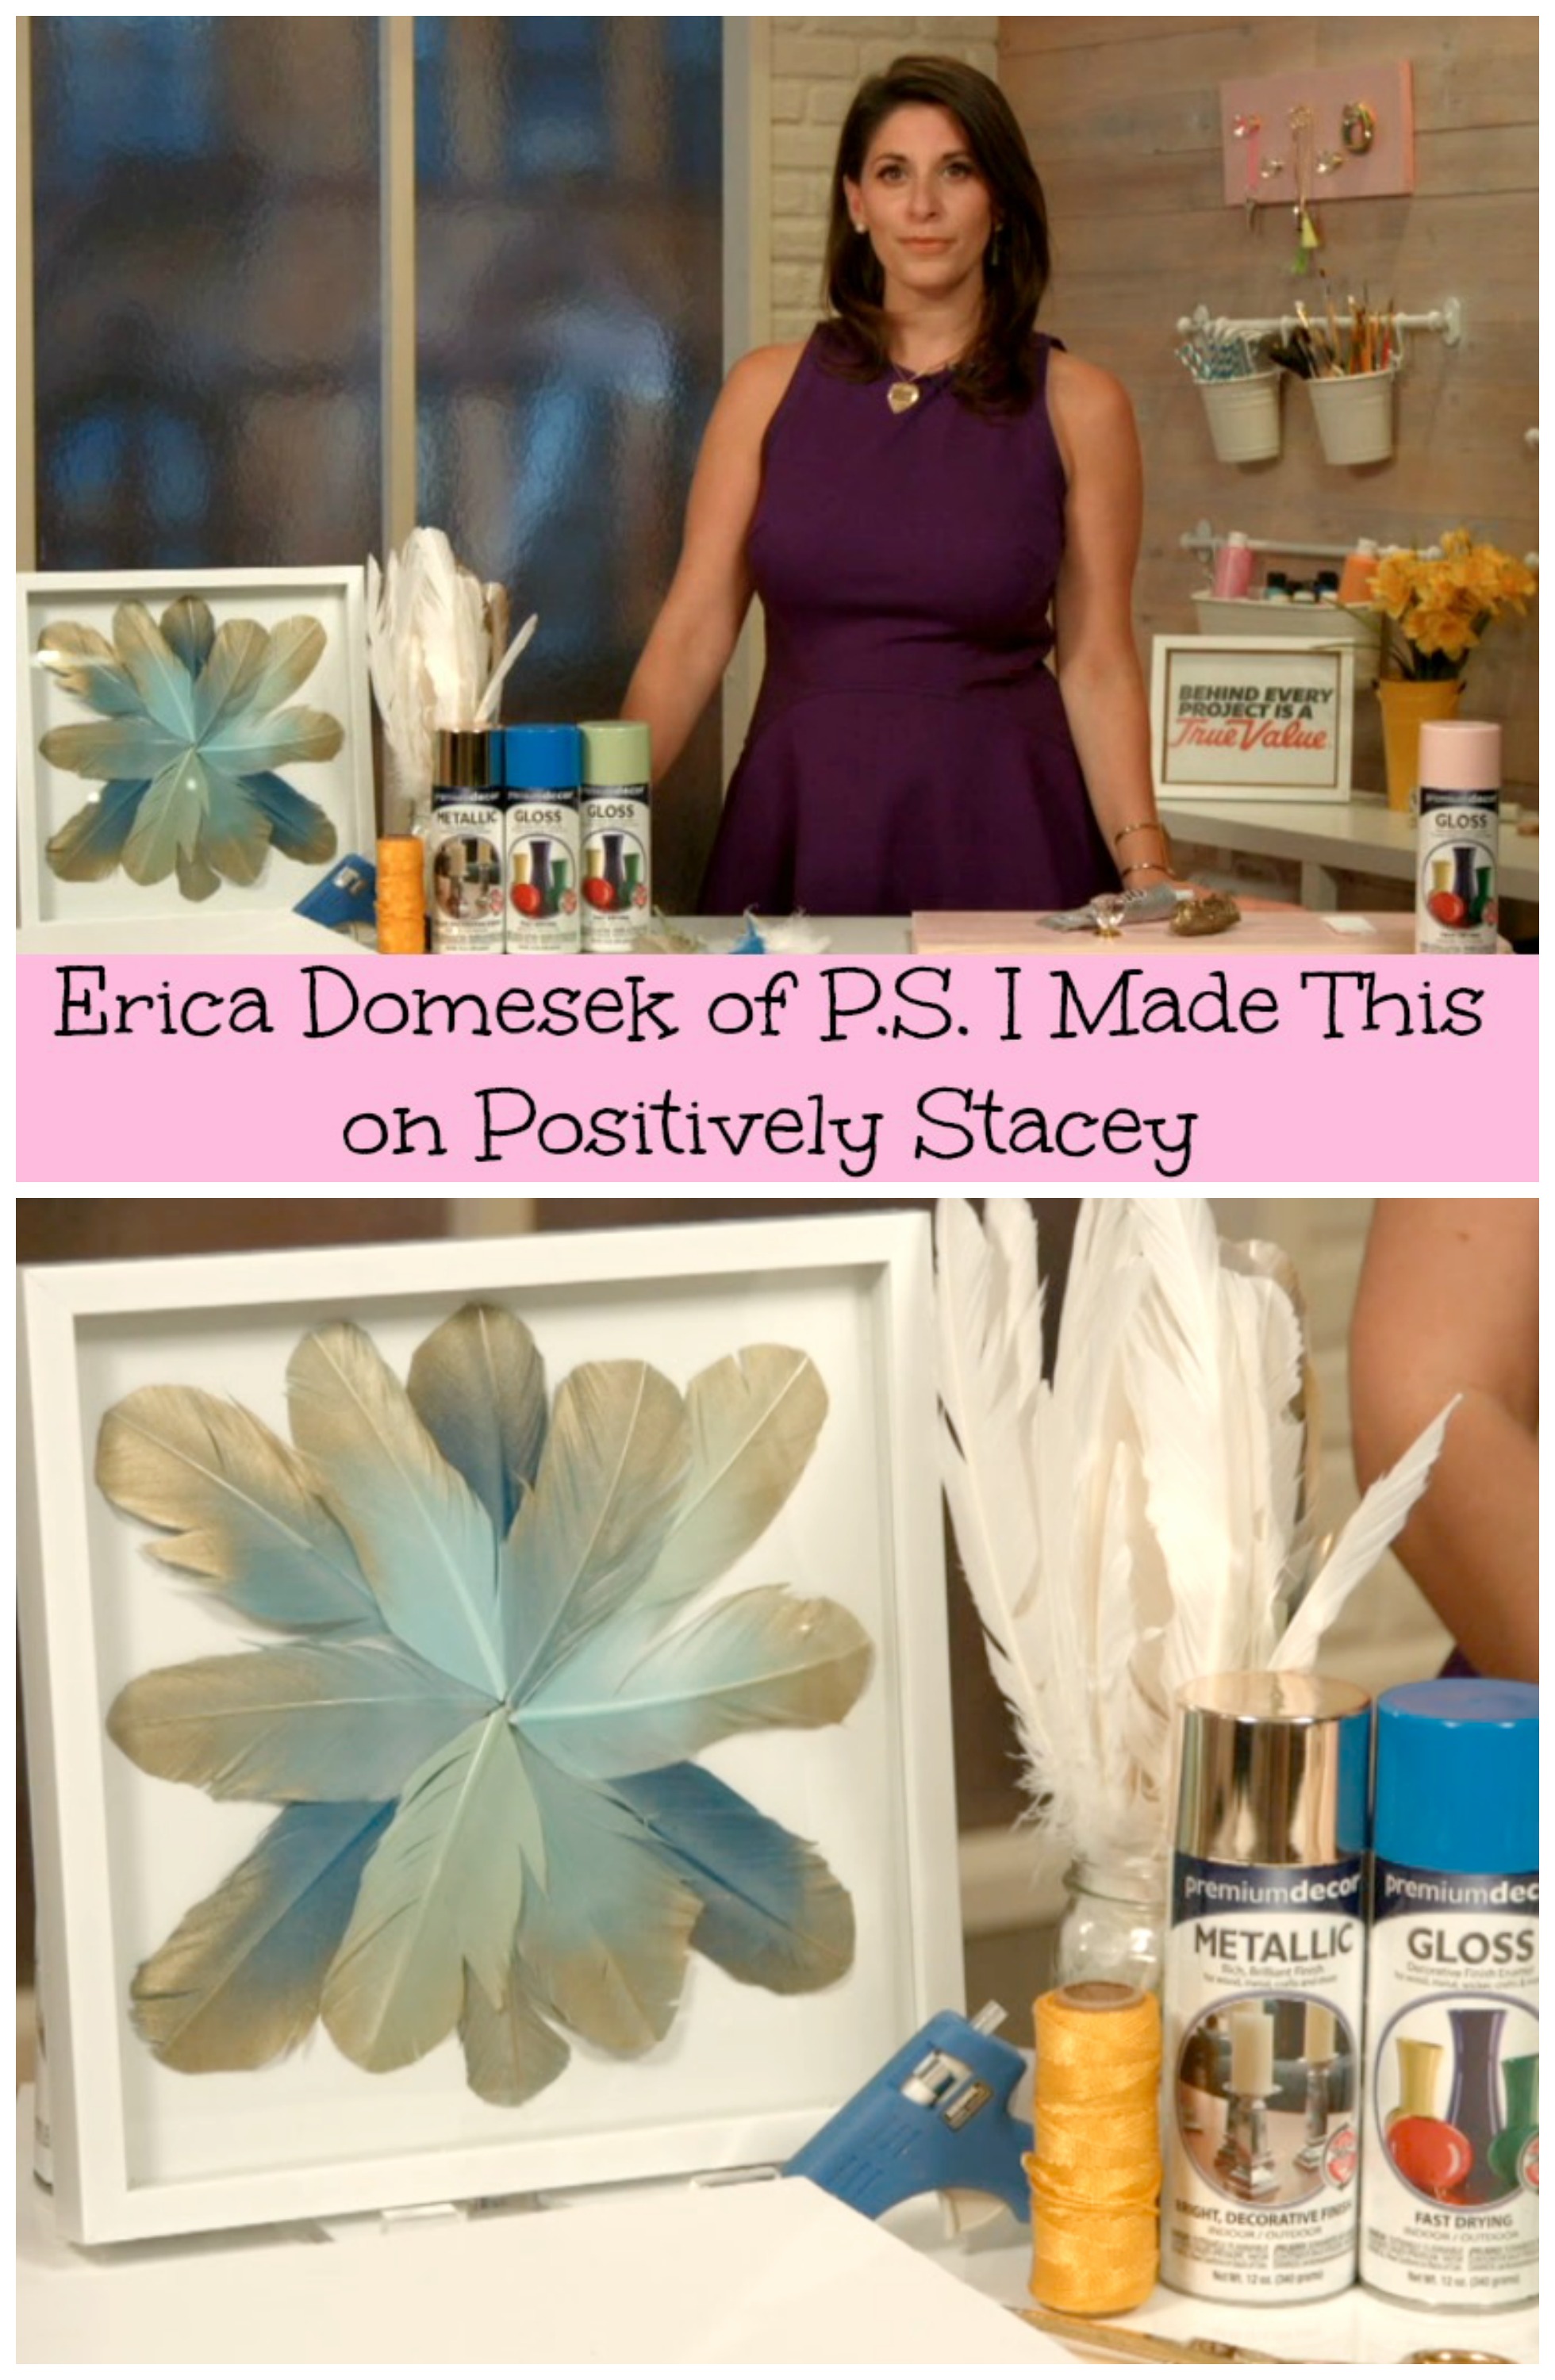 Let's get crafty with Erica Domesek!